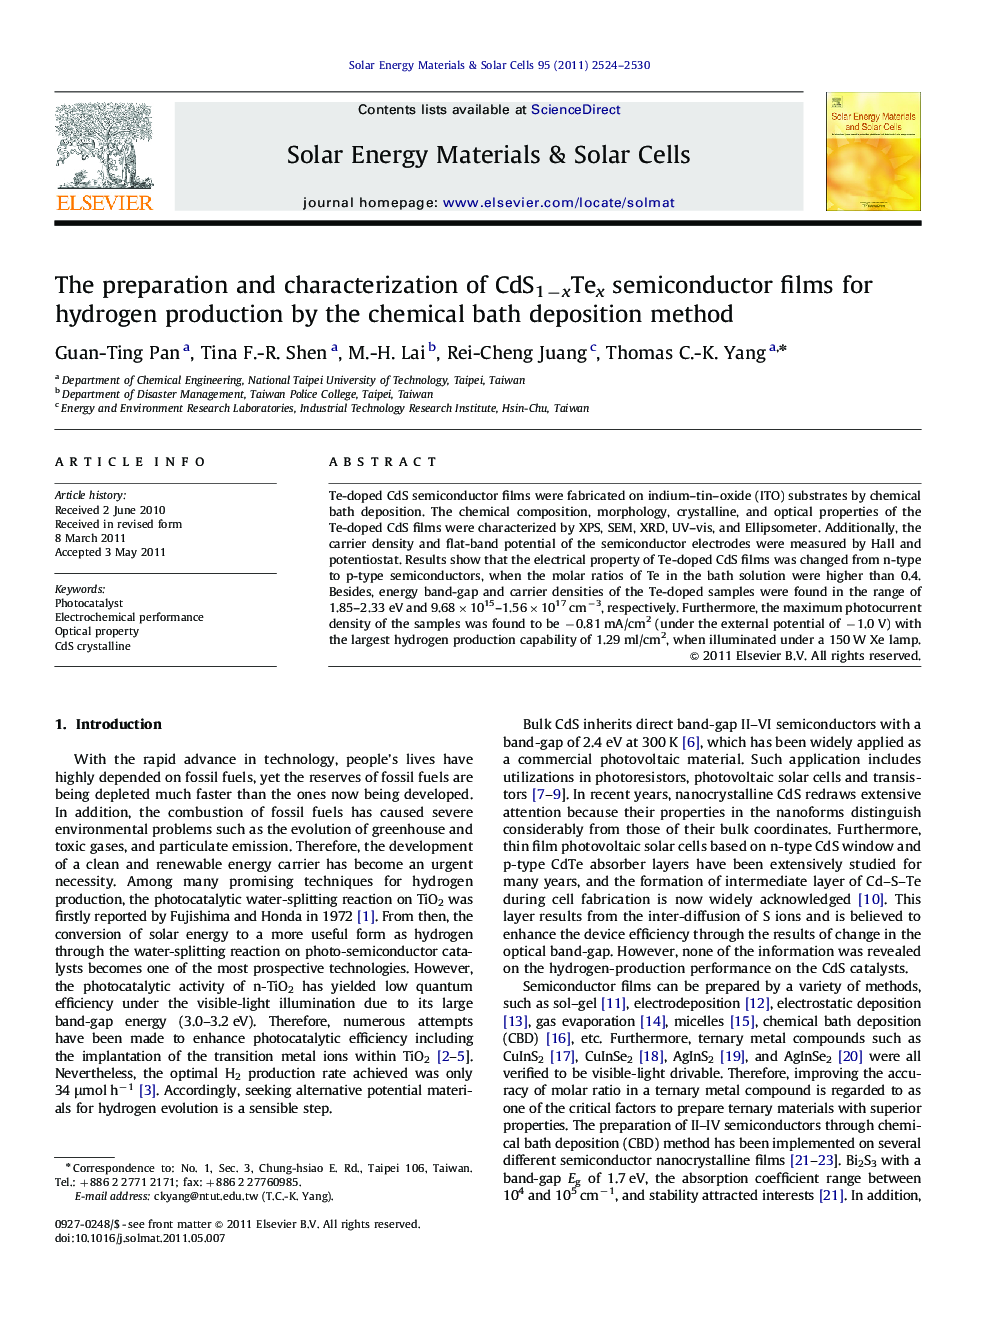 The preparation and characterization of CdS1−xTex semiconductor films for hydrogen production by the chemical bath deposition method